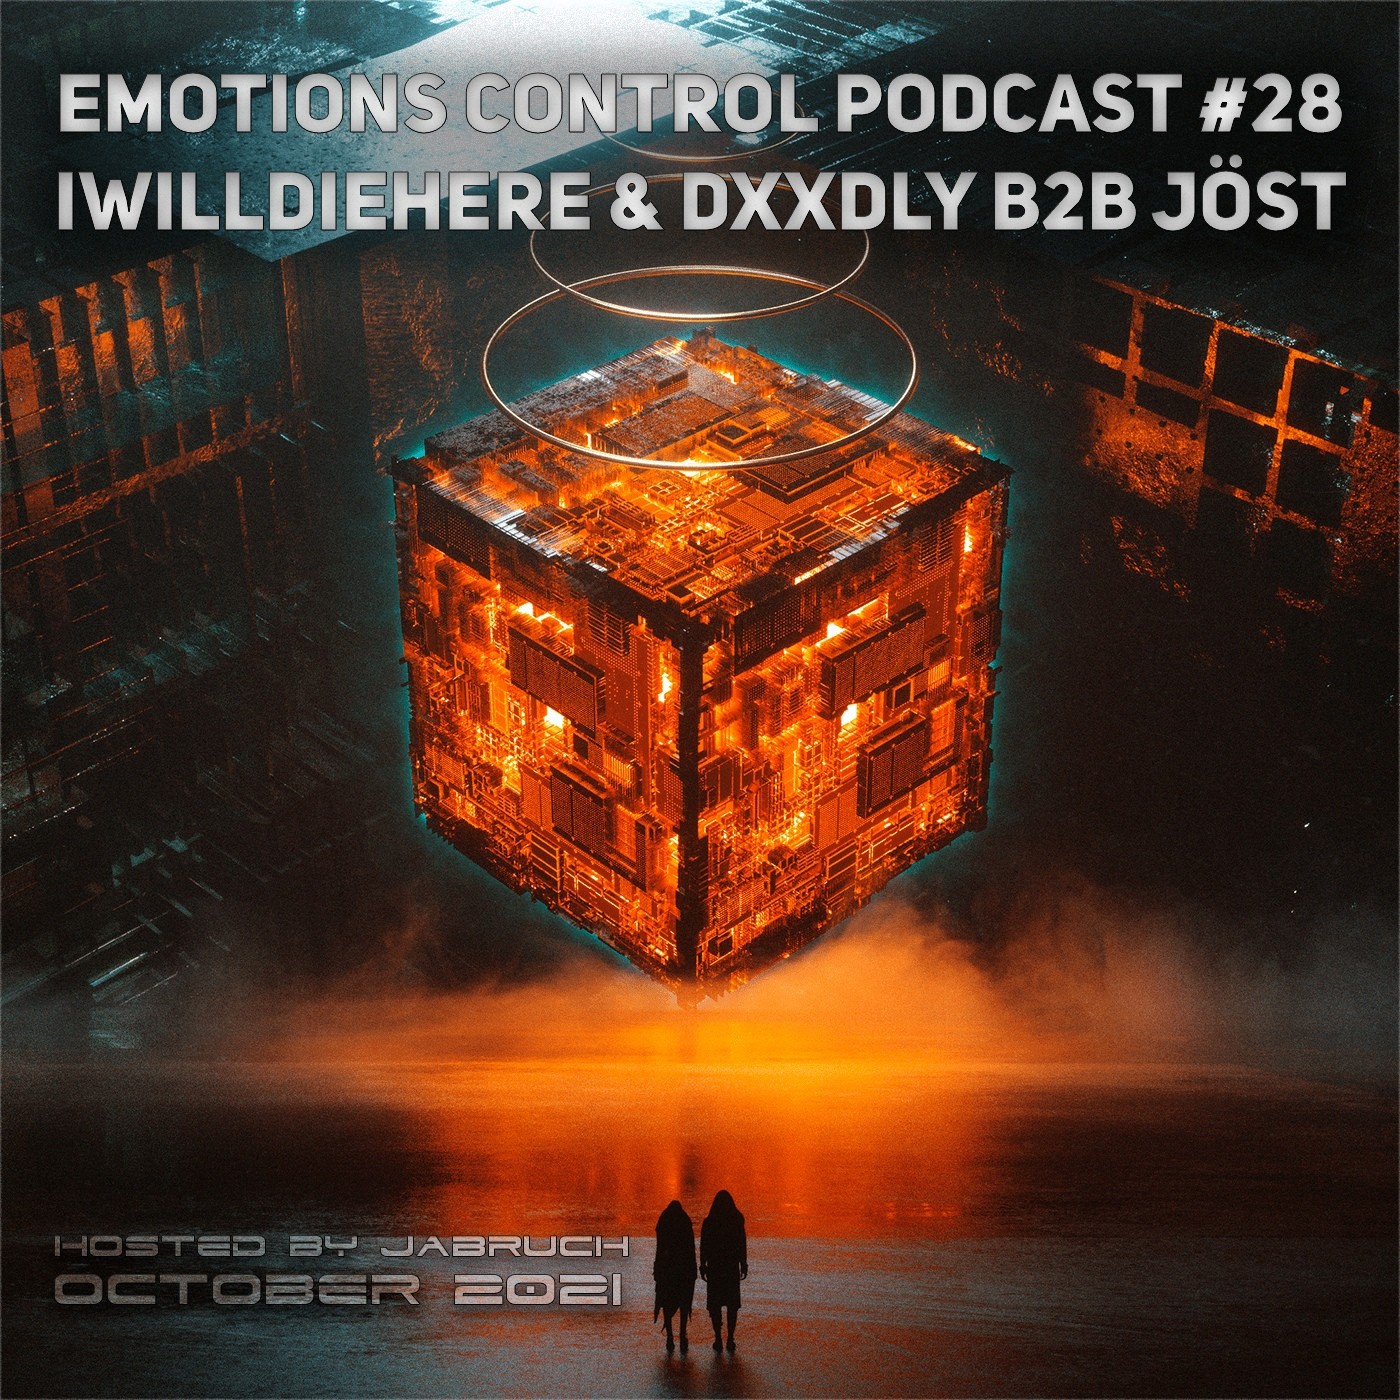 Emotions Control Podcast #28 iwilldiehere & DXXDLY B2B JÖST [October 2021] #28